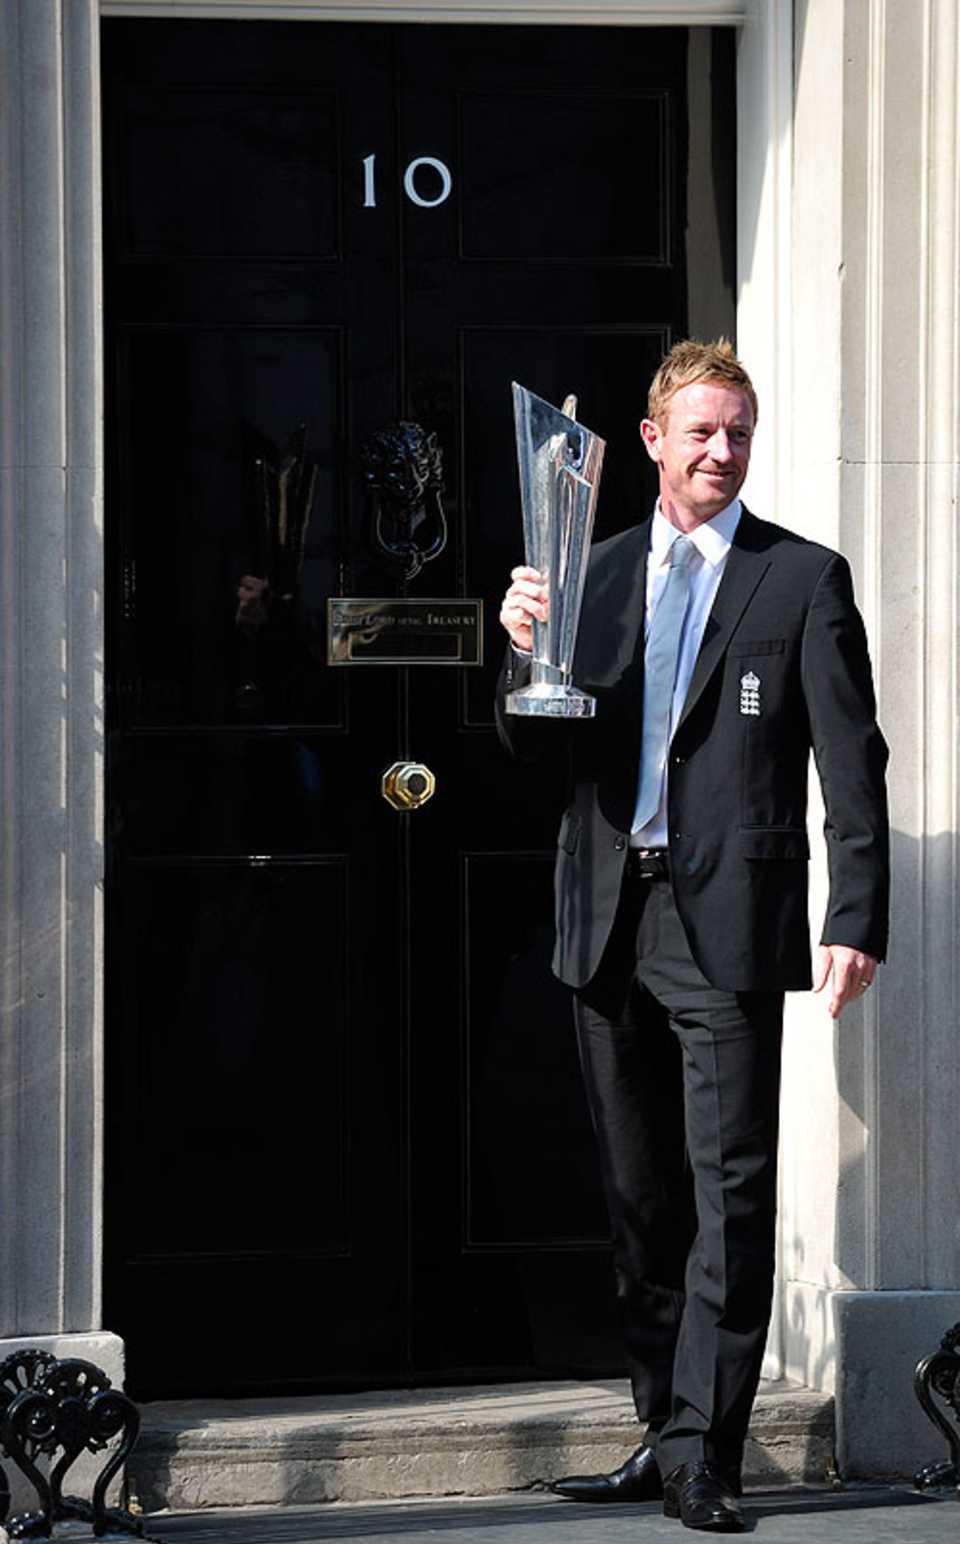 Paul Collingwood poses with the World Twenty20 trophy outside No. 10 Downing Street, London, May 24, 2010